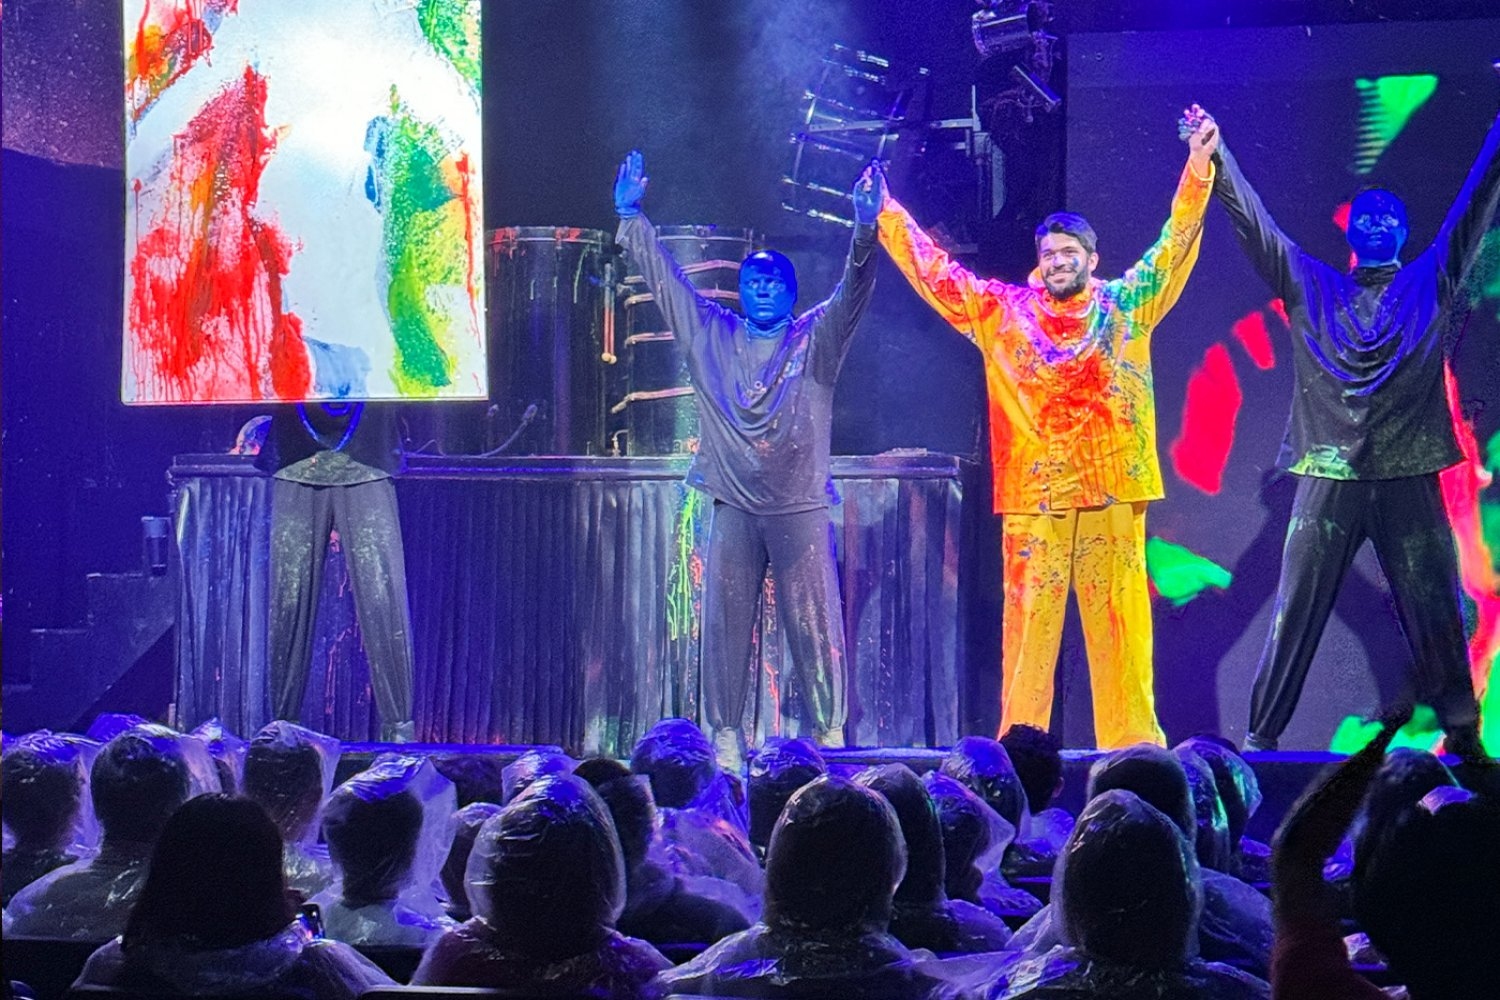 A student clad in a yellow rain suit splattered with paint stands between two men with blue heads and takes a bow on stage.